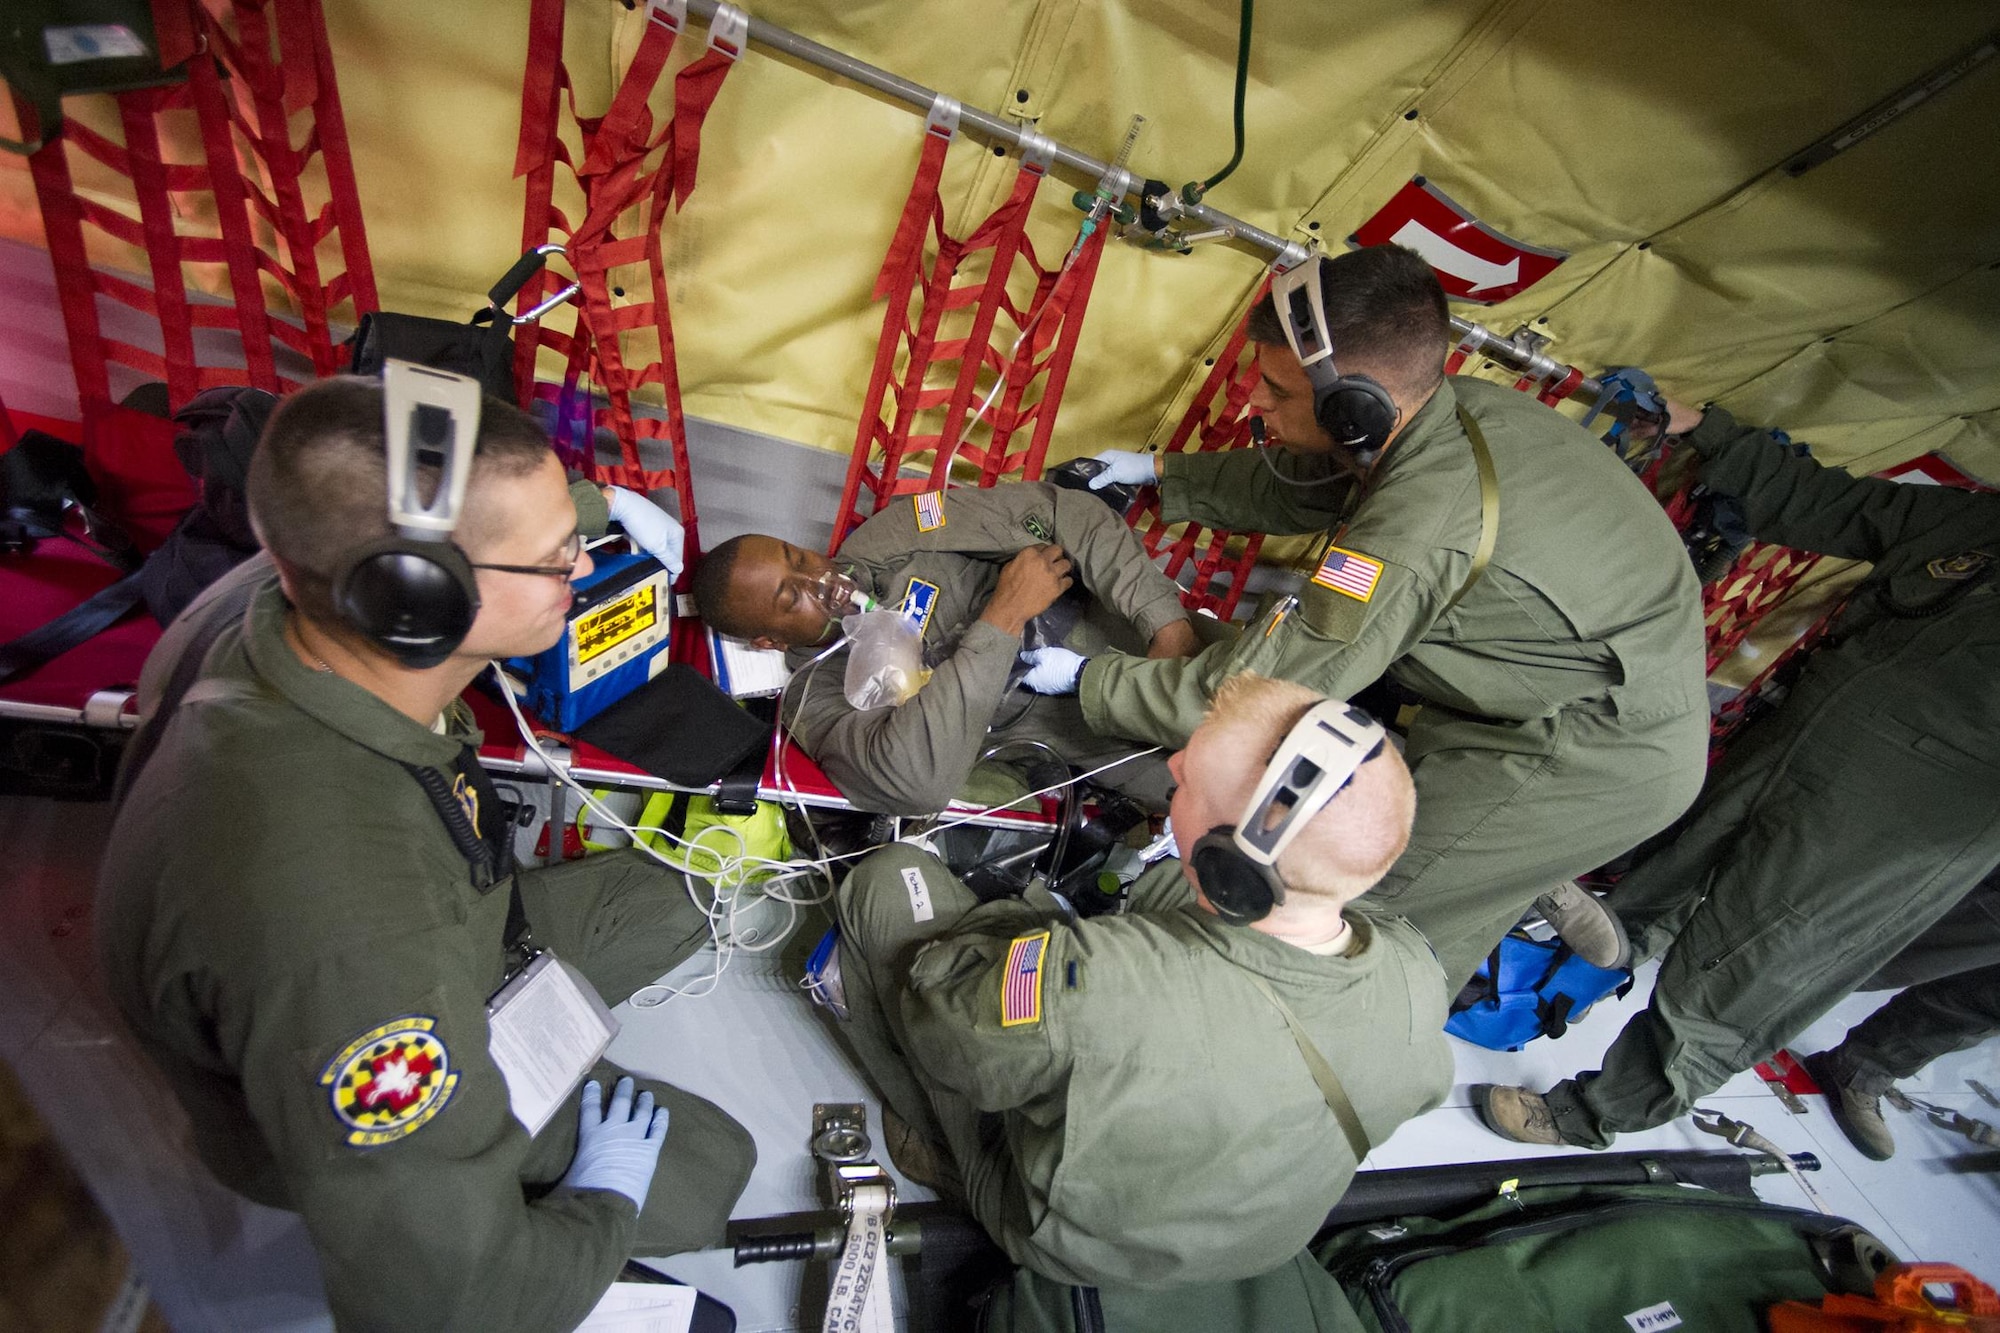 Members of the 459th Aeromedical Evacuation Squadron treat a seizure patient during an exercise onboard a KC-135R Stratotanker enroute from Joint Base Andrews, Maryland, to Peterson Air Force Base, Colorado, Friday, Aug. 26, 2016. More than a dozen AES flight nurses, technicians and administrators flew to Peterson to conduct joint unit training with other AE squadrons on board the KC-135, C-17 Globemaster III and C-130H3 Hercules. Serving as a medical transport unit, the 459th AES trained for various medical conditions and situations. (U.S. Air Force photo/Staff Sgt. Kat Justen)